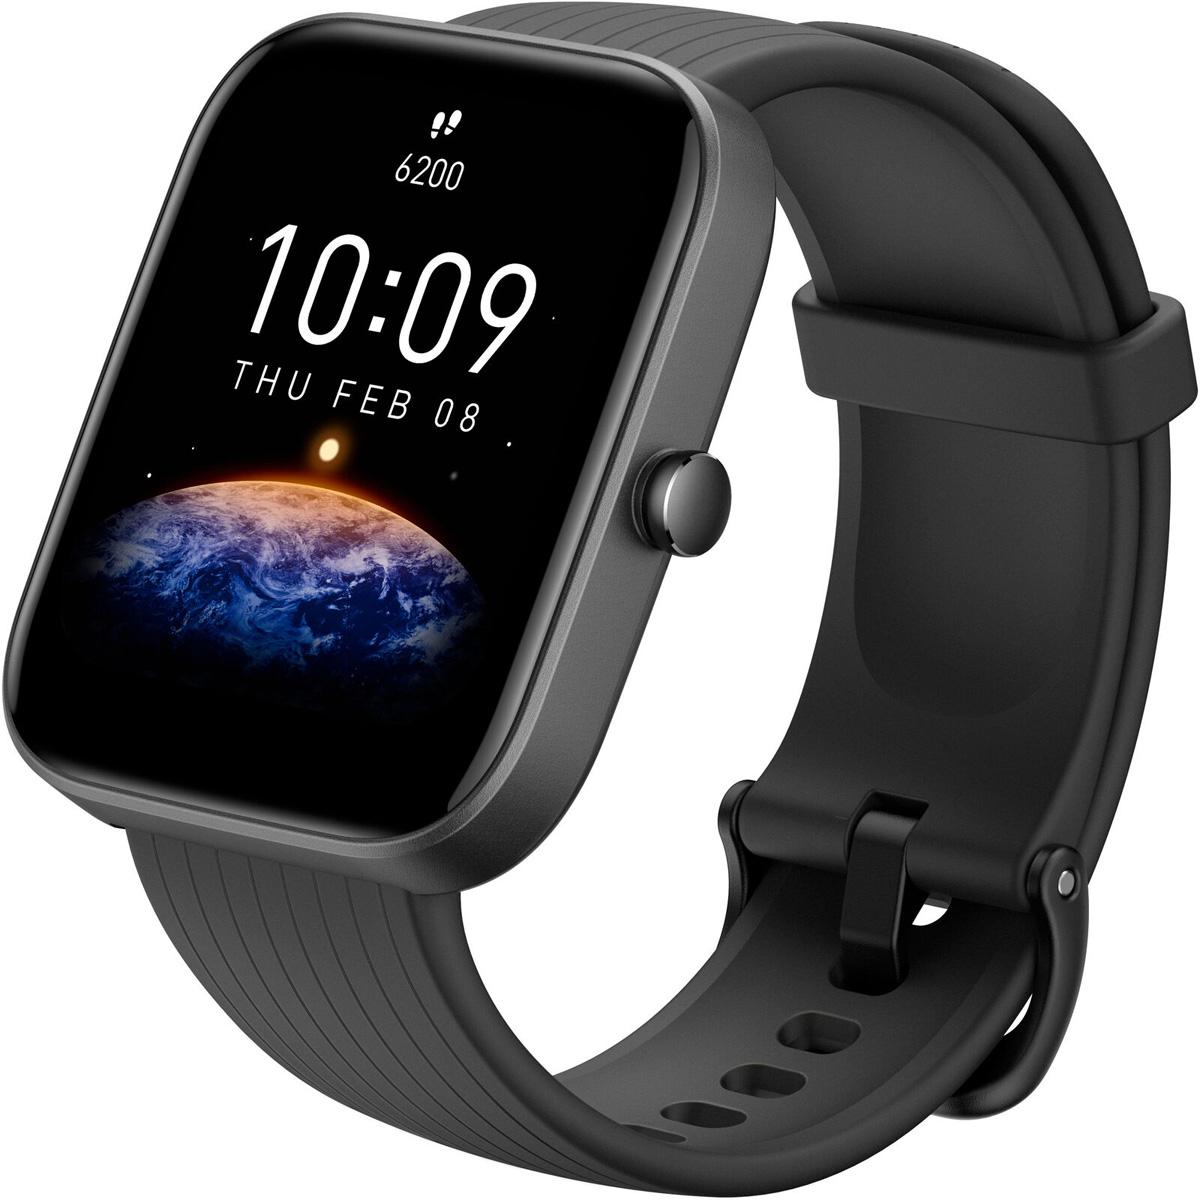 Amazfit Bip 3 Pro 42.9mm Smartwatch for $49.99 Shipped